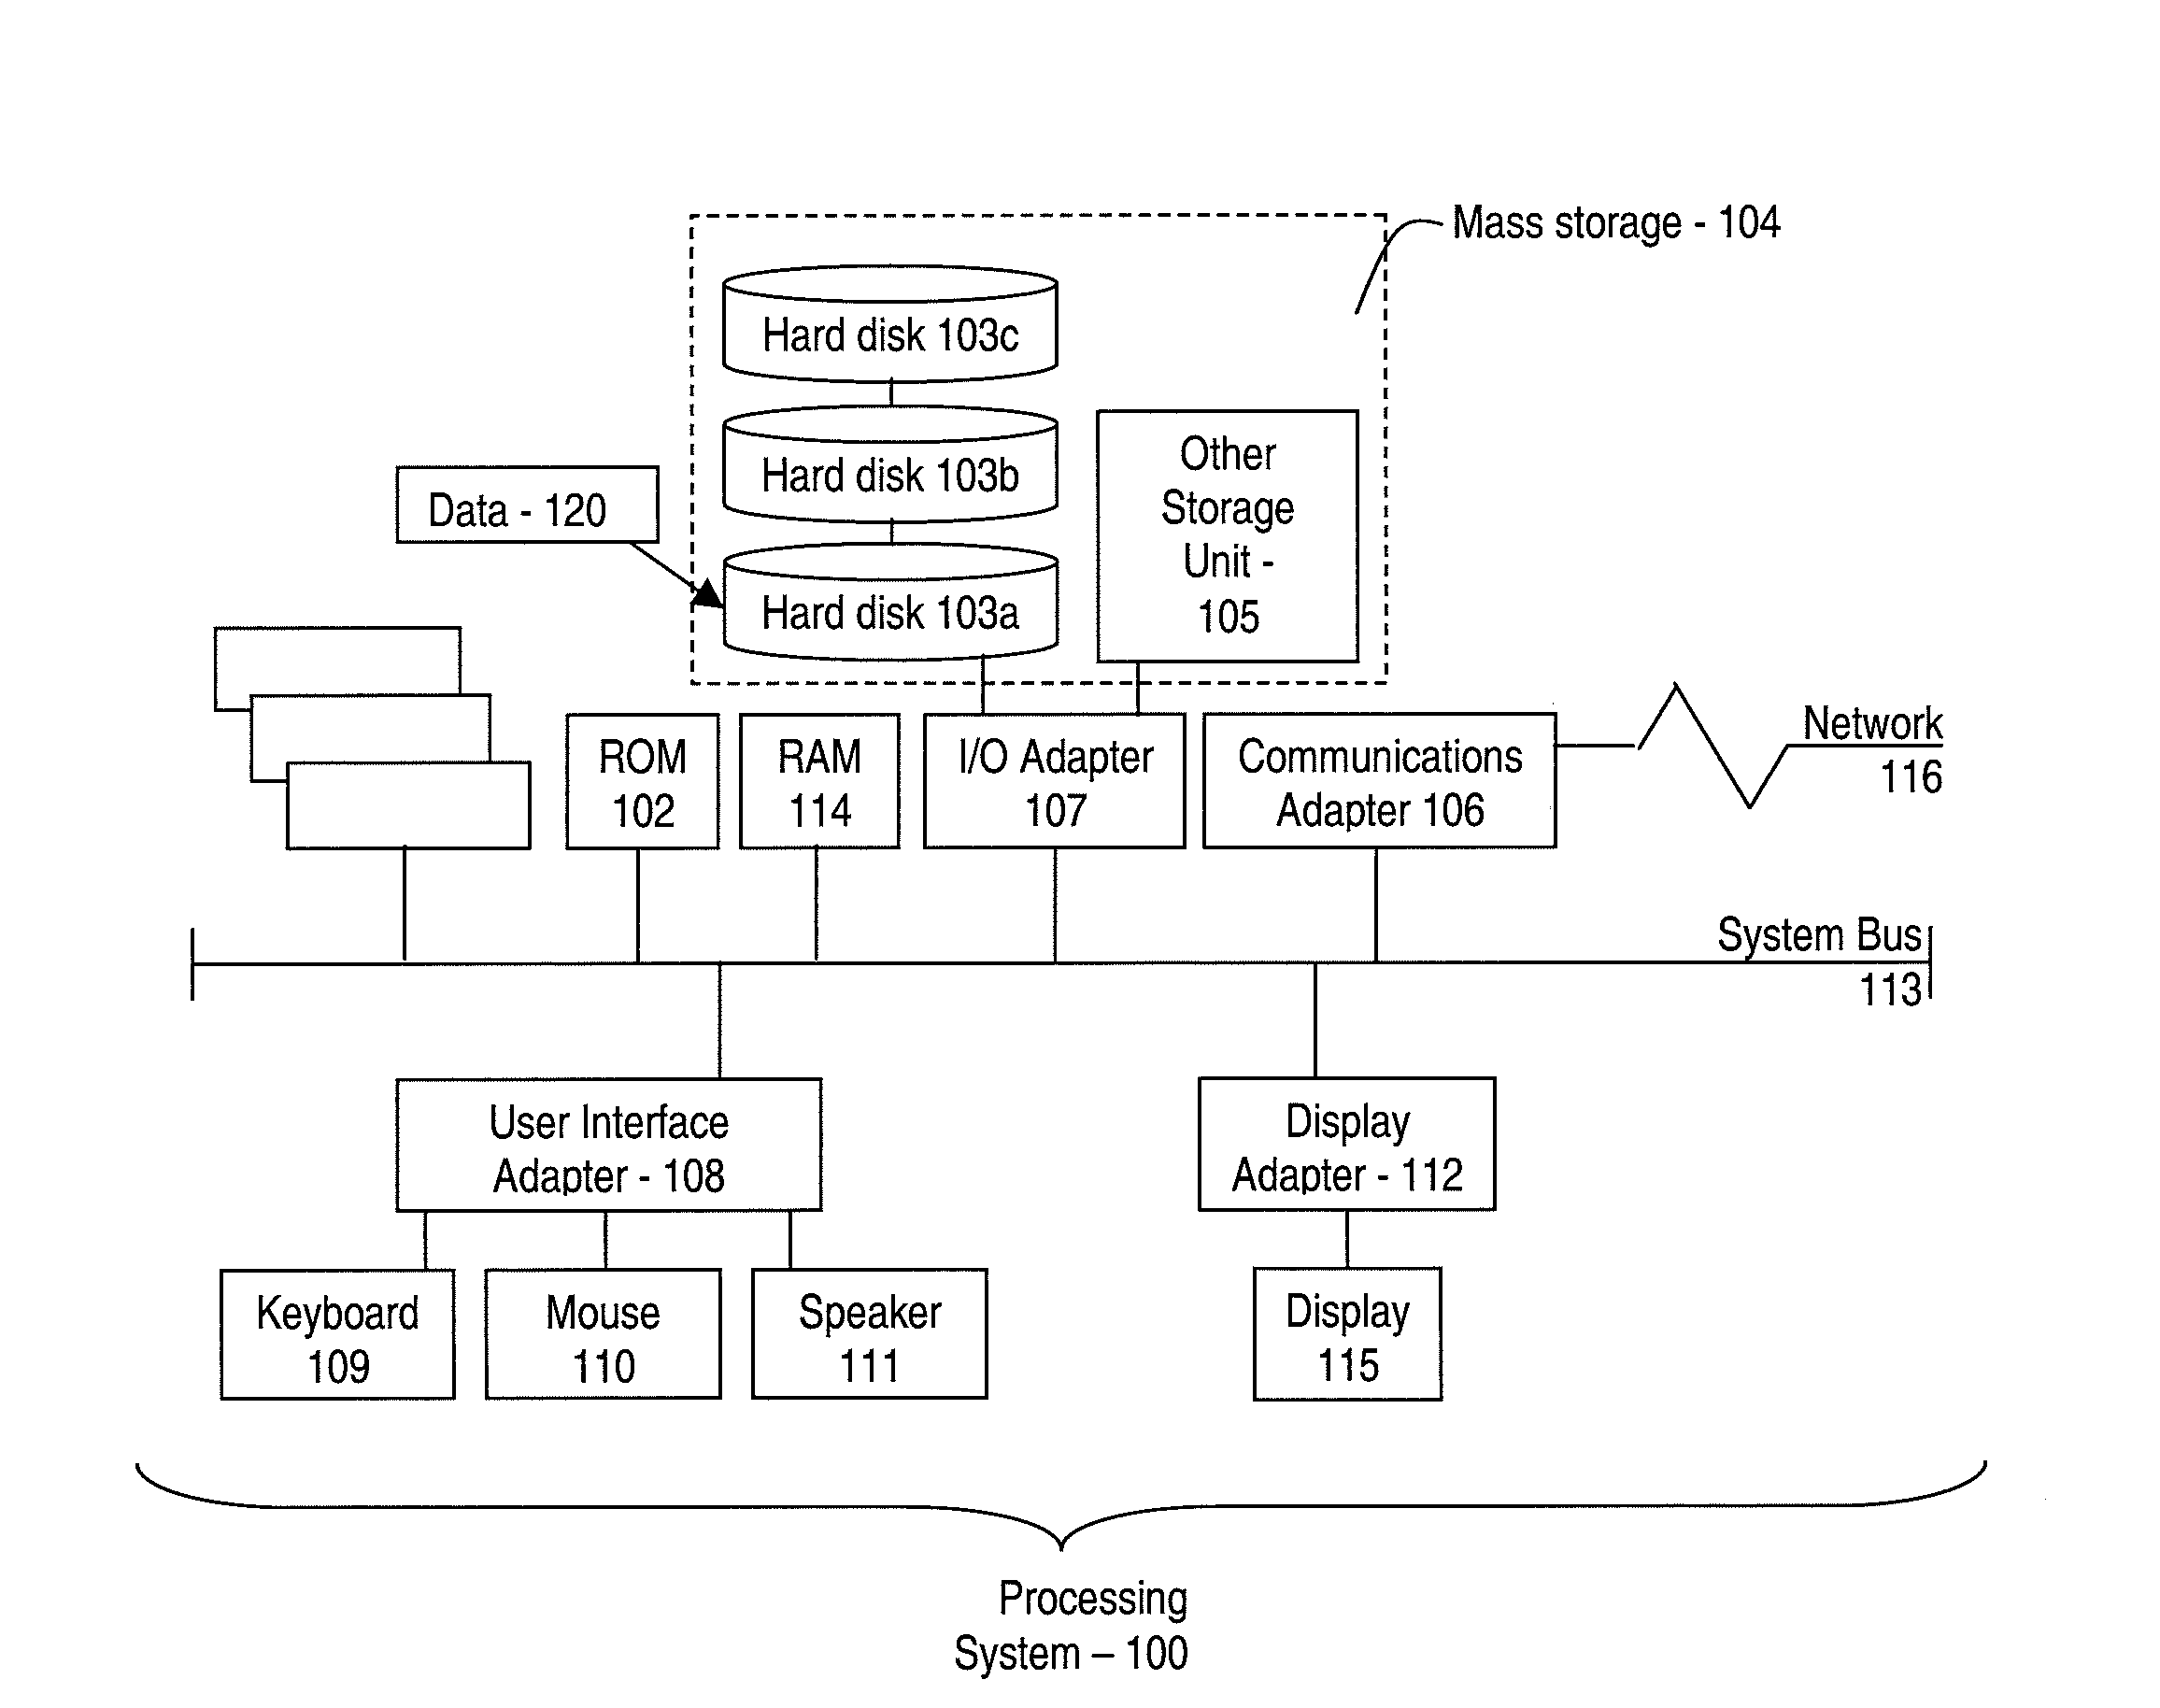 Enhancement of data mirroring to provide parallel processing of overlapping writes